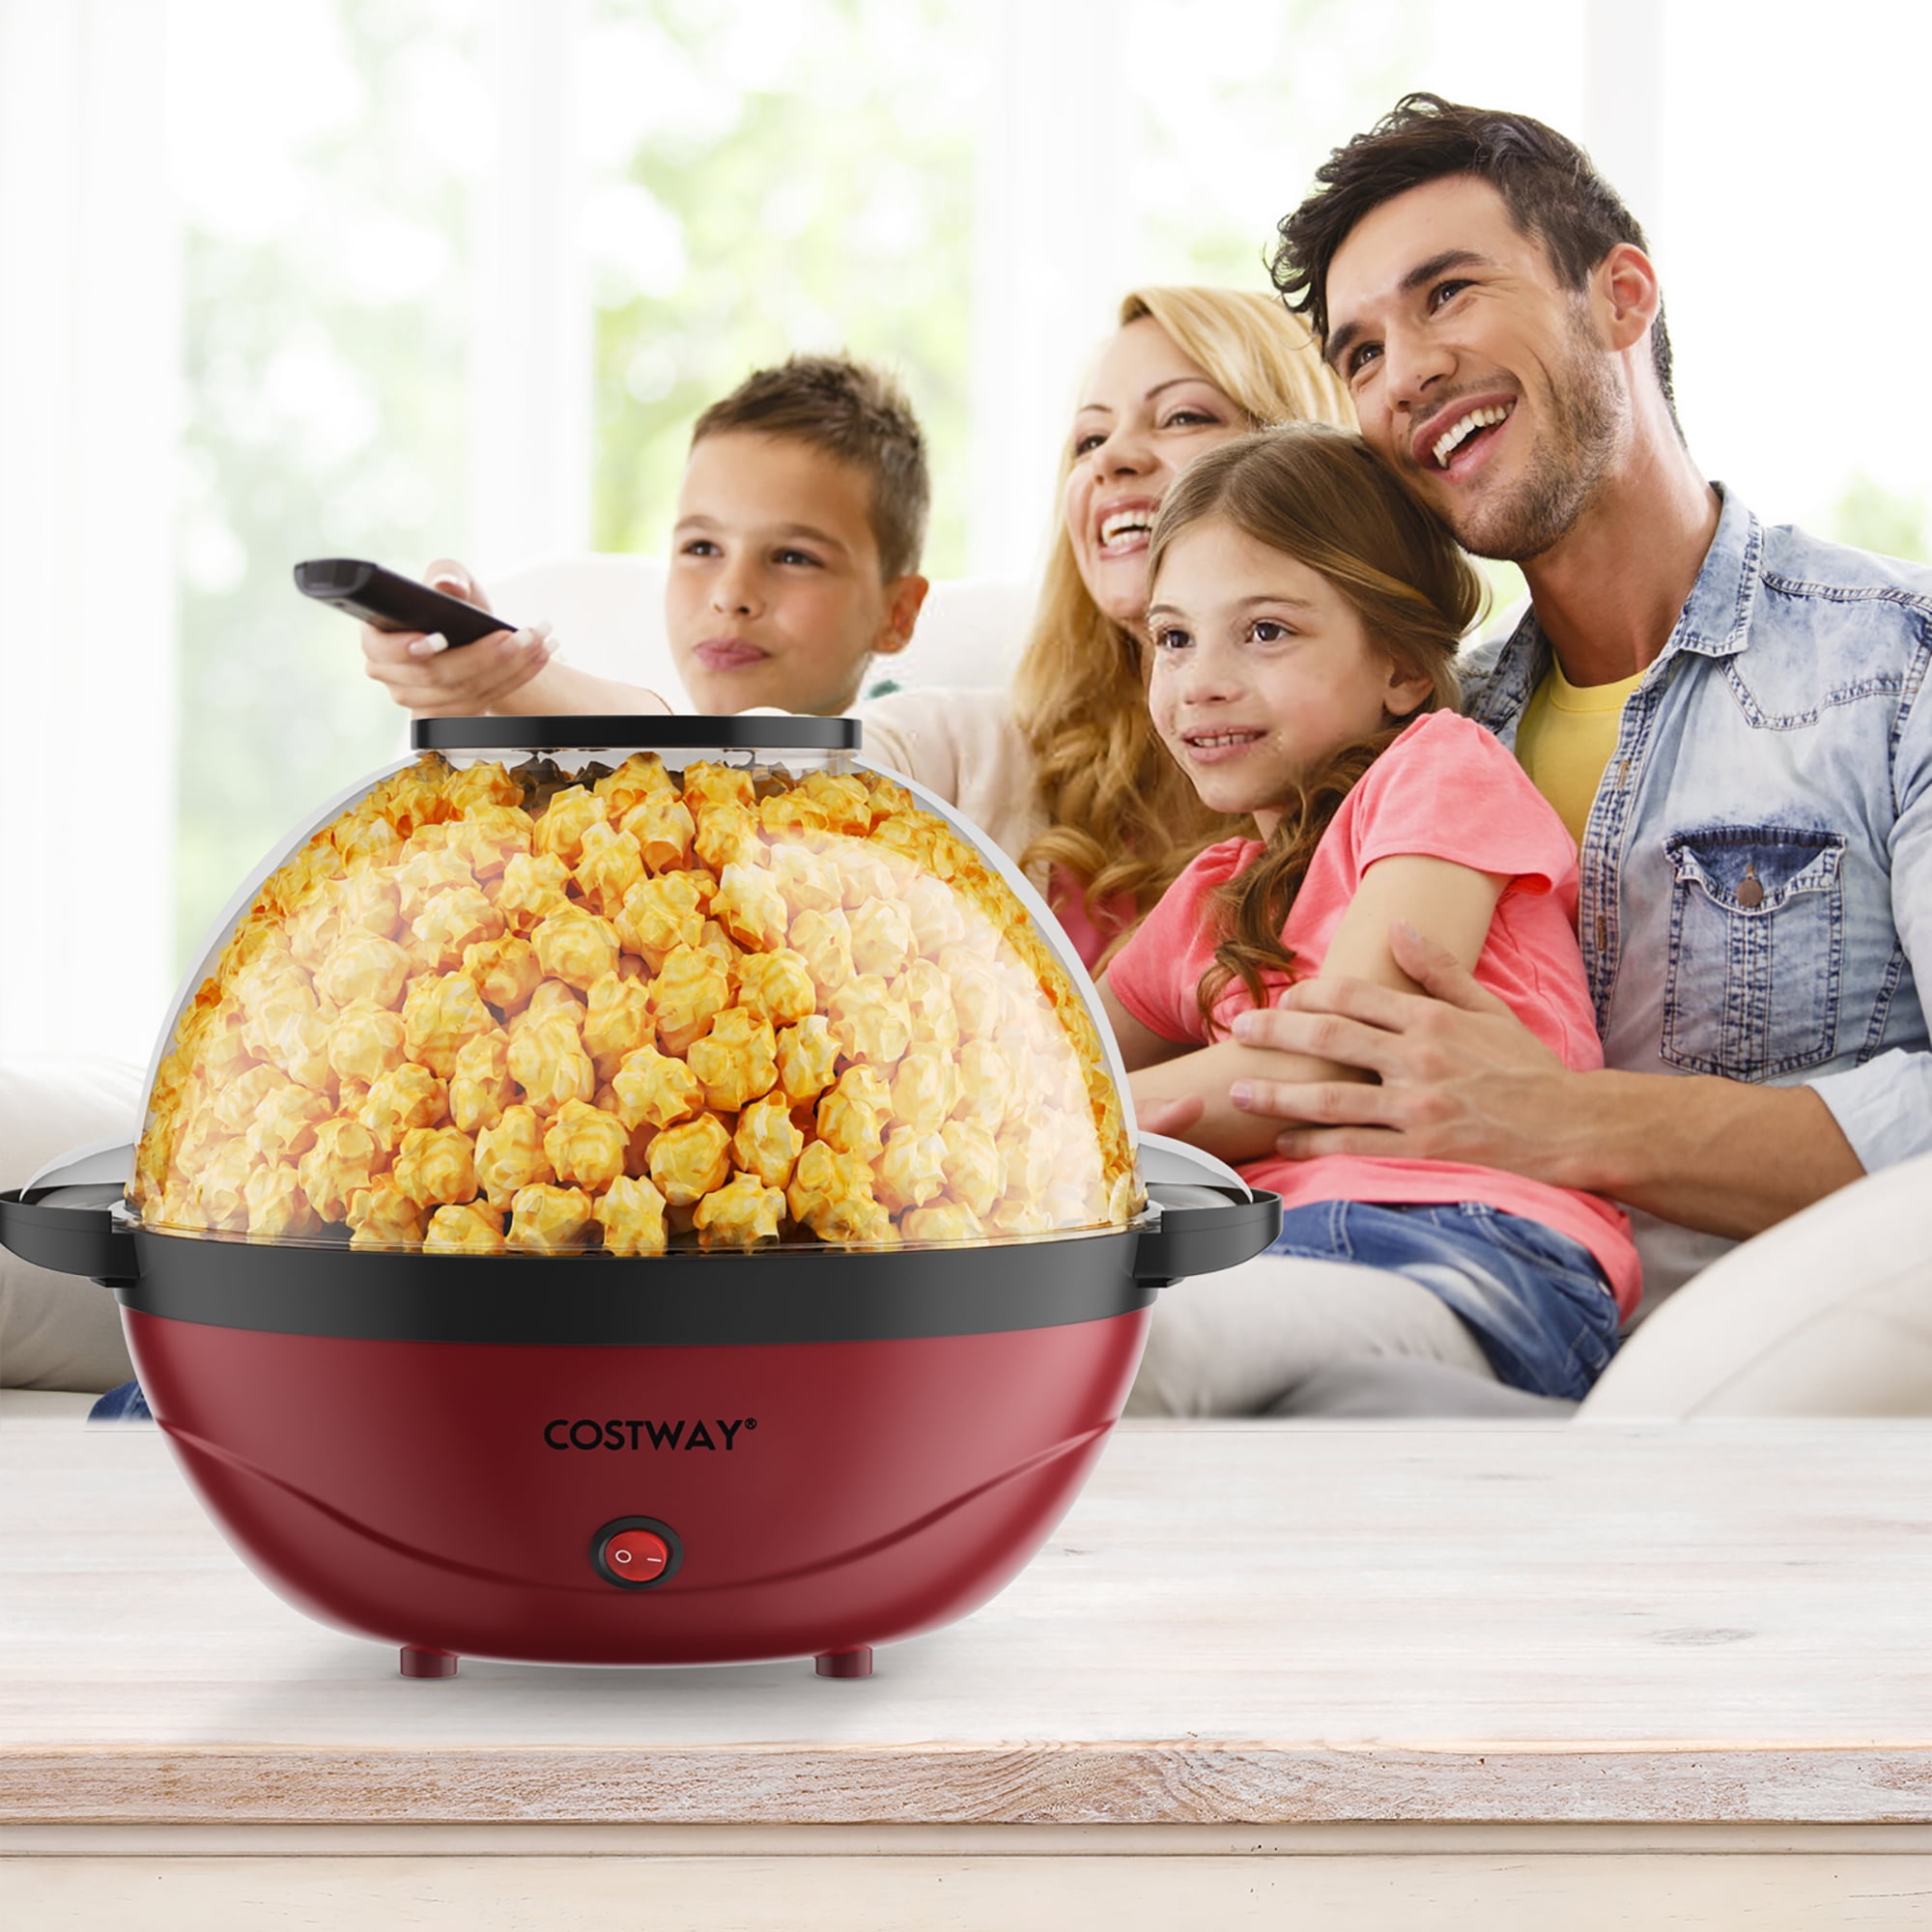 GreenLife - Electric Popcorn Maker - Red